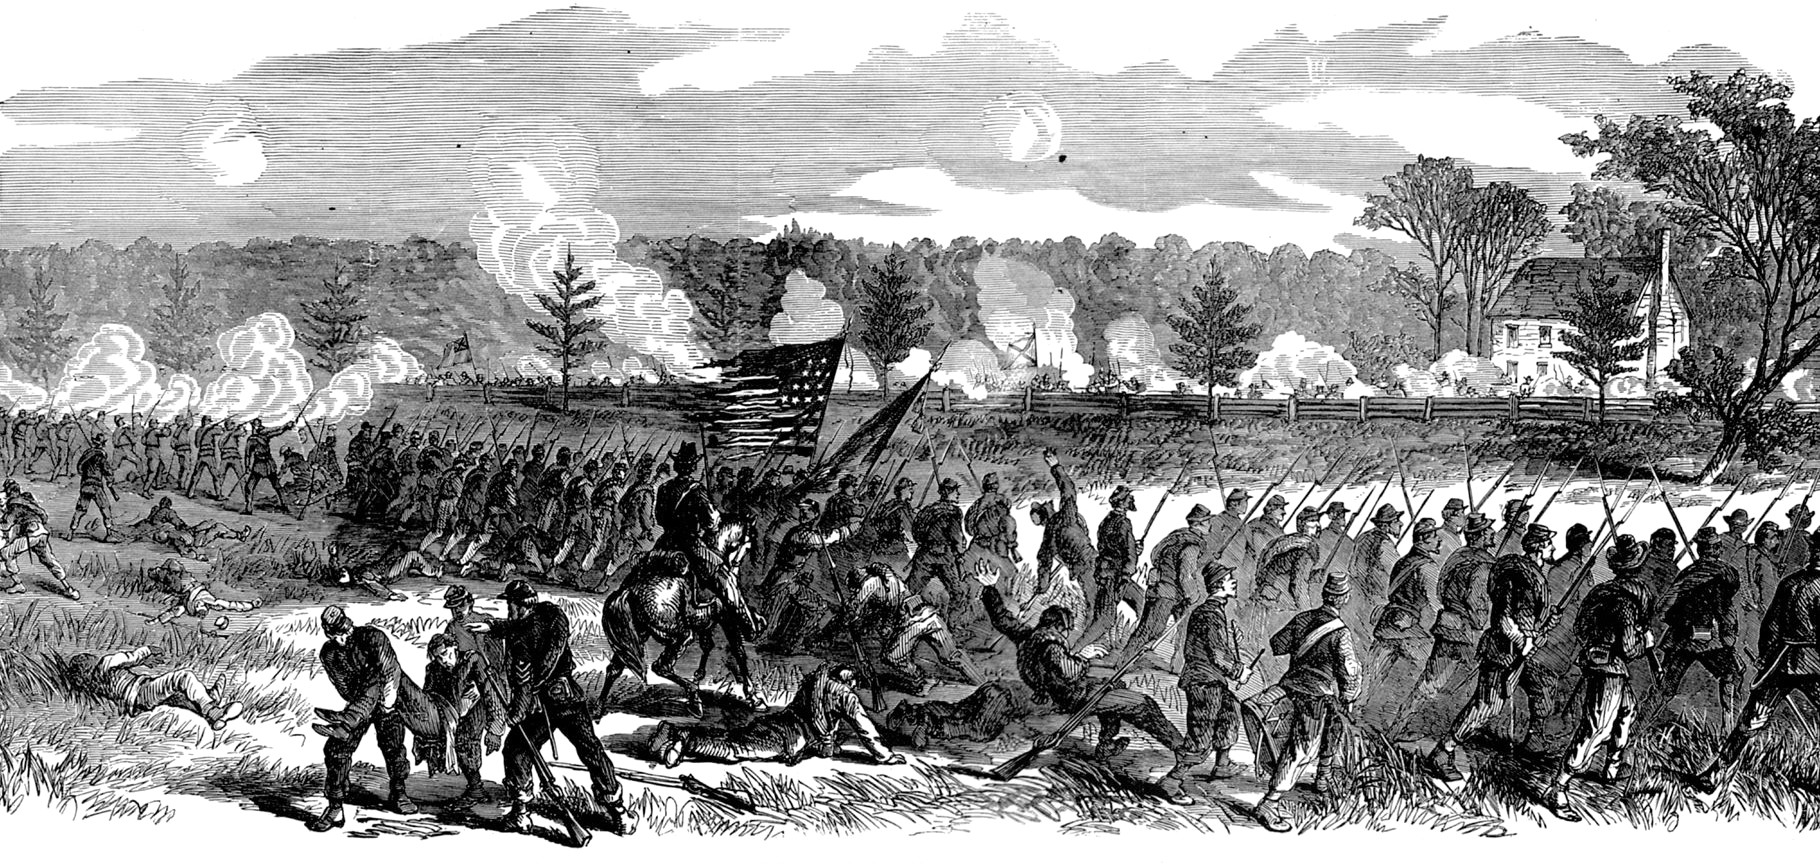 Major General William Smith’s VIII Corps attacks the first line of Confederate rifle pits at Cold Harbor. Battlefield sketch by Edwin Forbes.